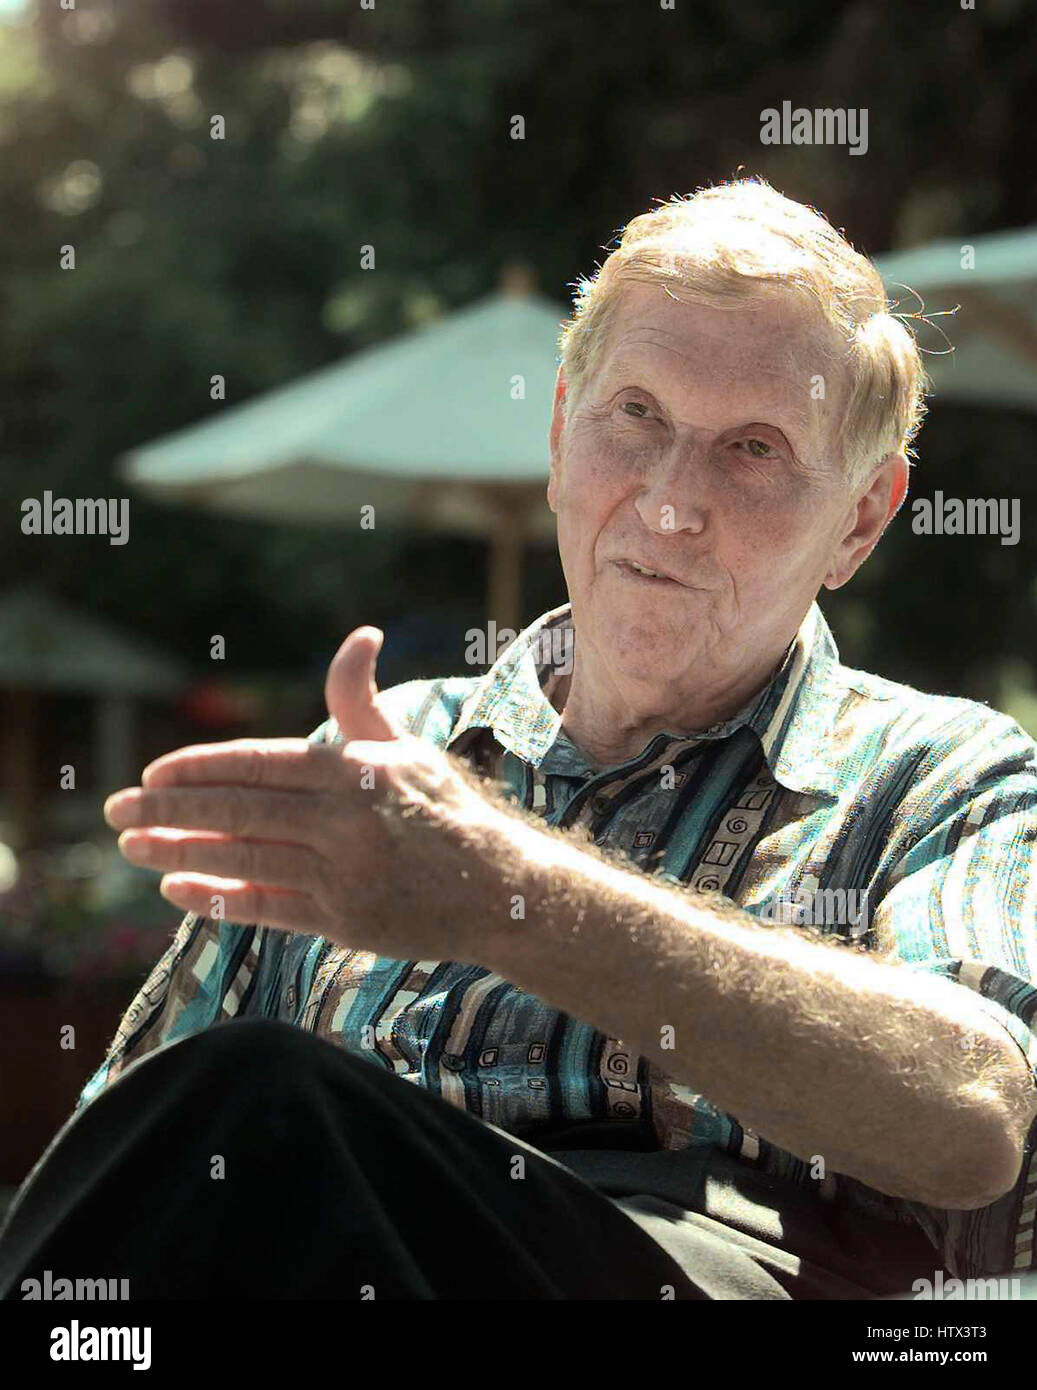 Sumner Redstone of Viacom at the Allen and Co. media conference on July 10, 1999 in Sun Valley, Idaho. Photo by Francis Specker Stock Photo